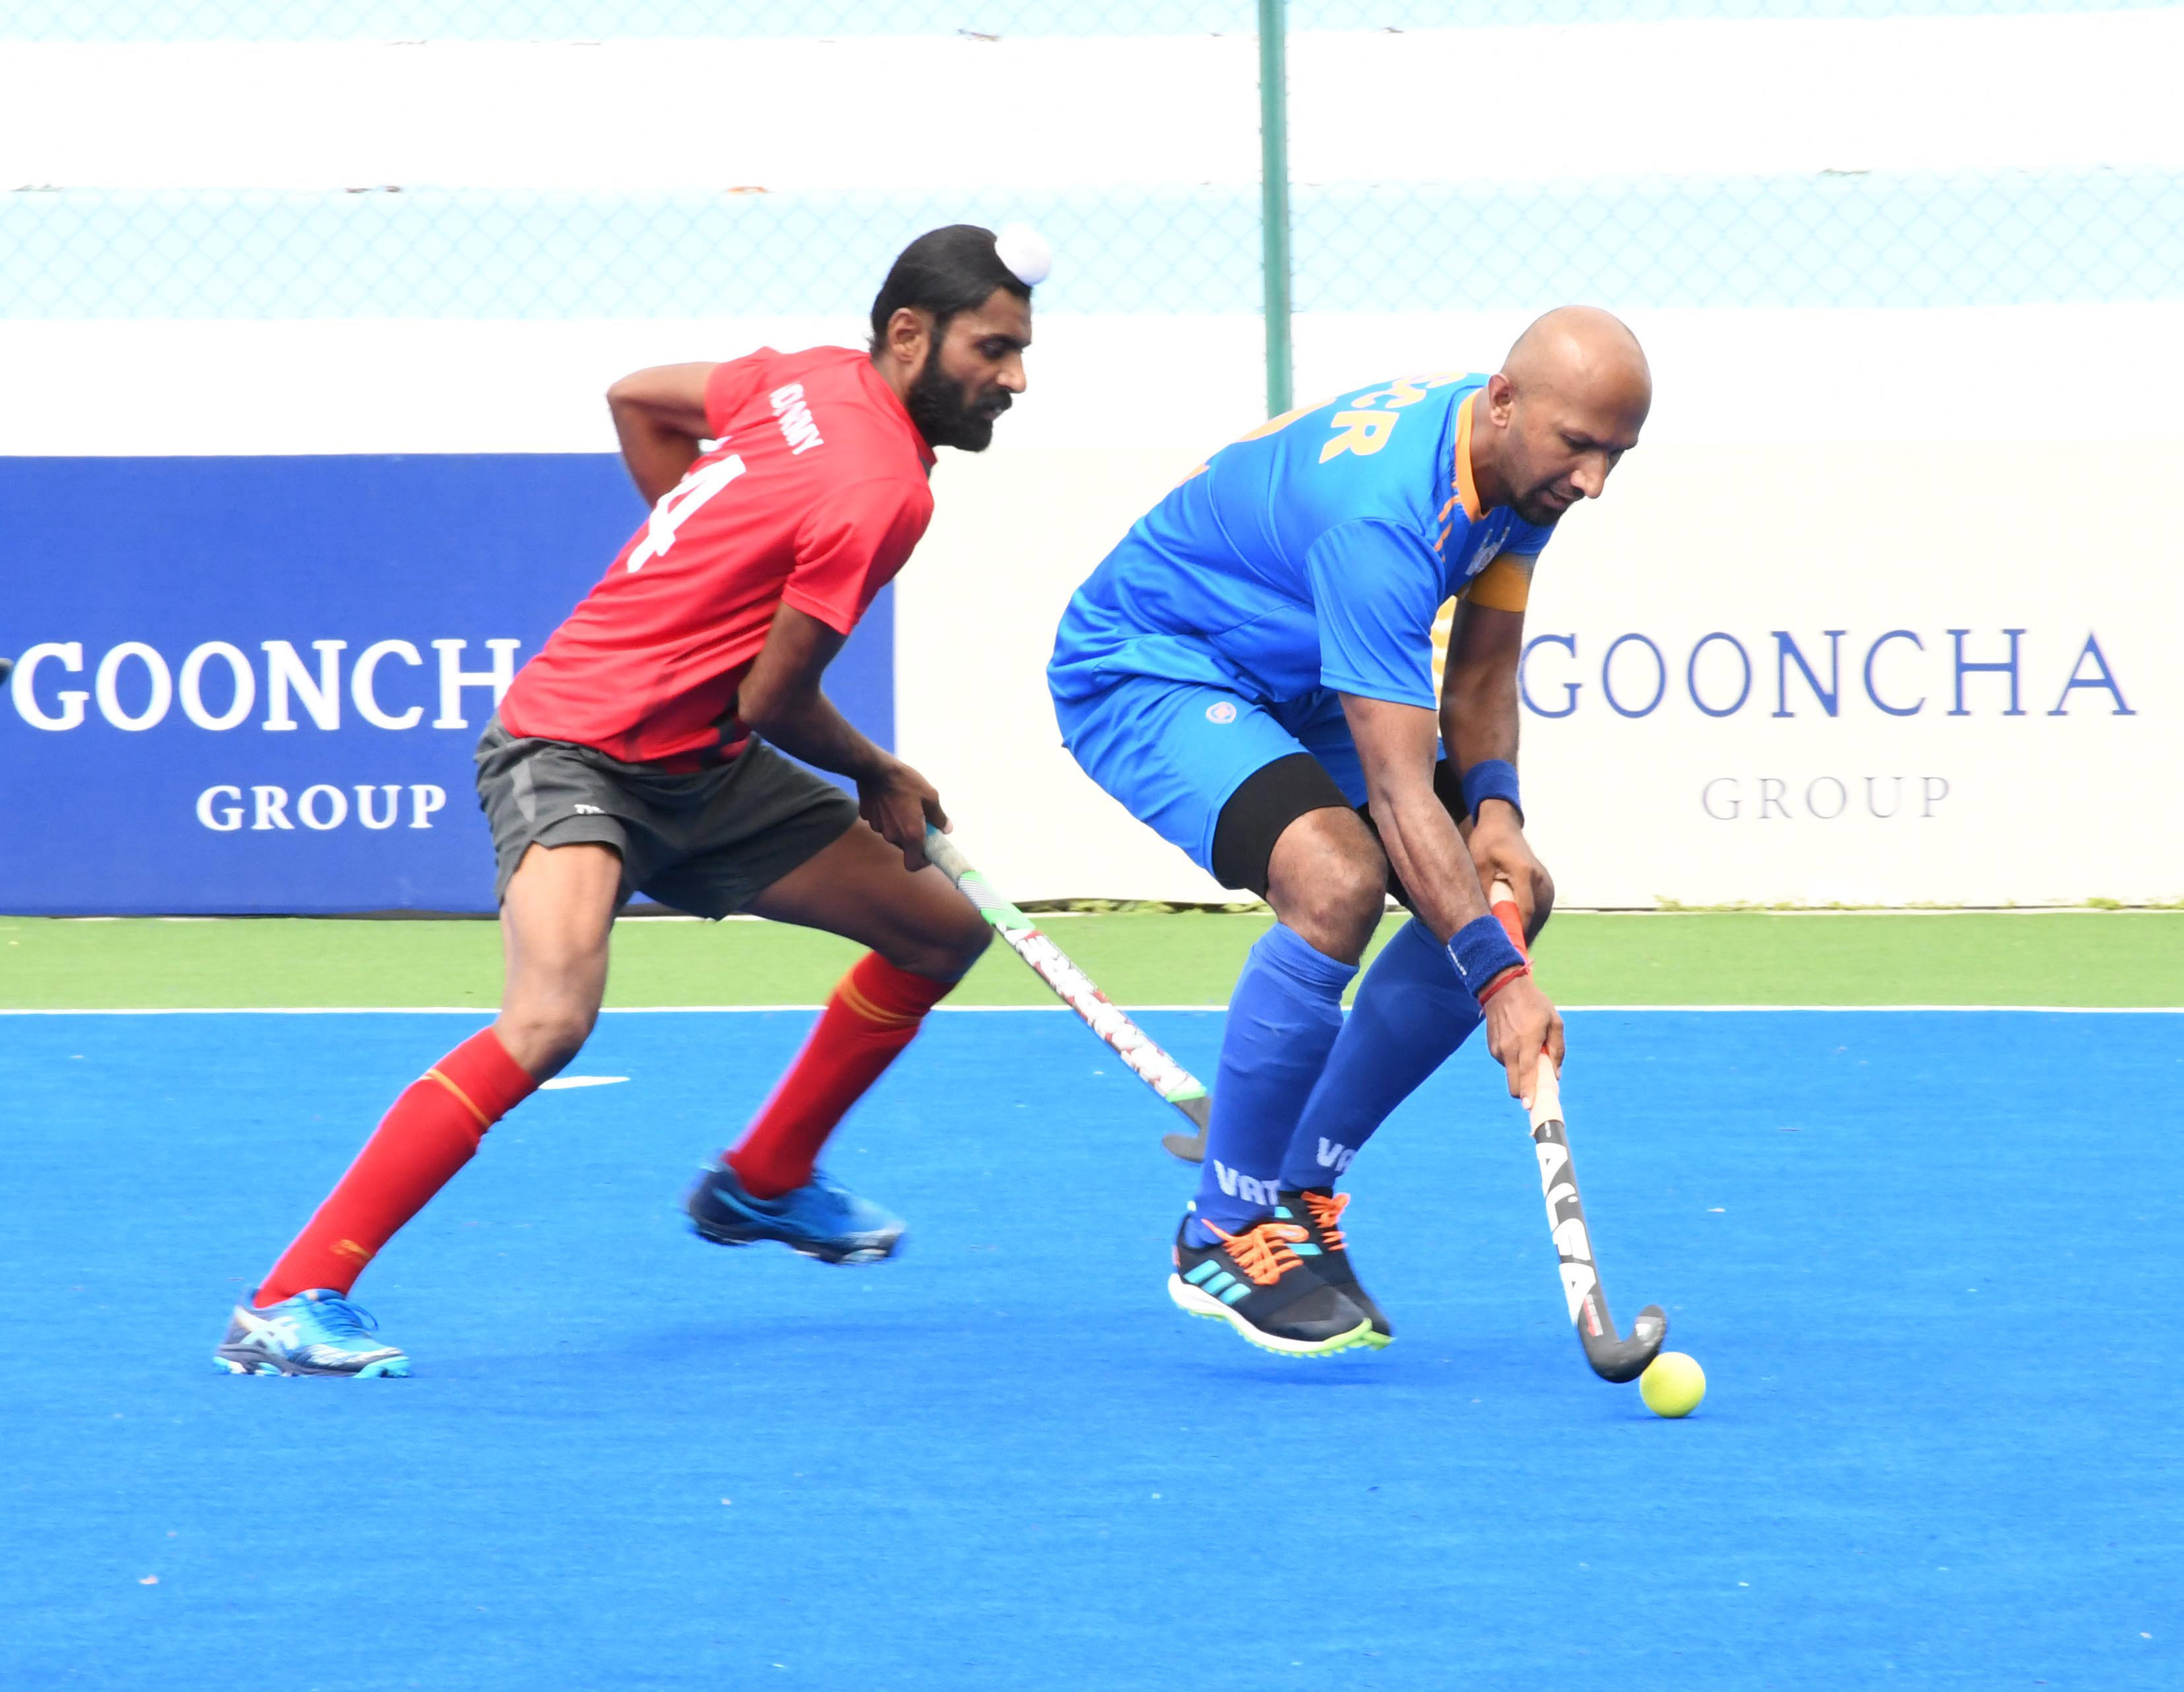 SCR beats Army Xl by 3-2 & remains in contention for a semifinal berth at the  'Gooncha 57th Nehru Senior Hockey Tournament’!